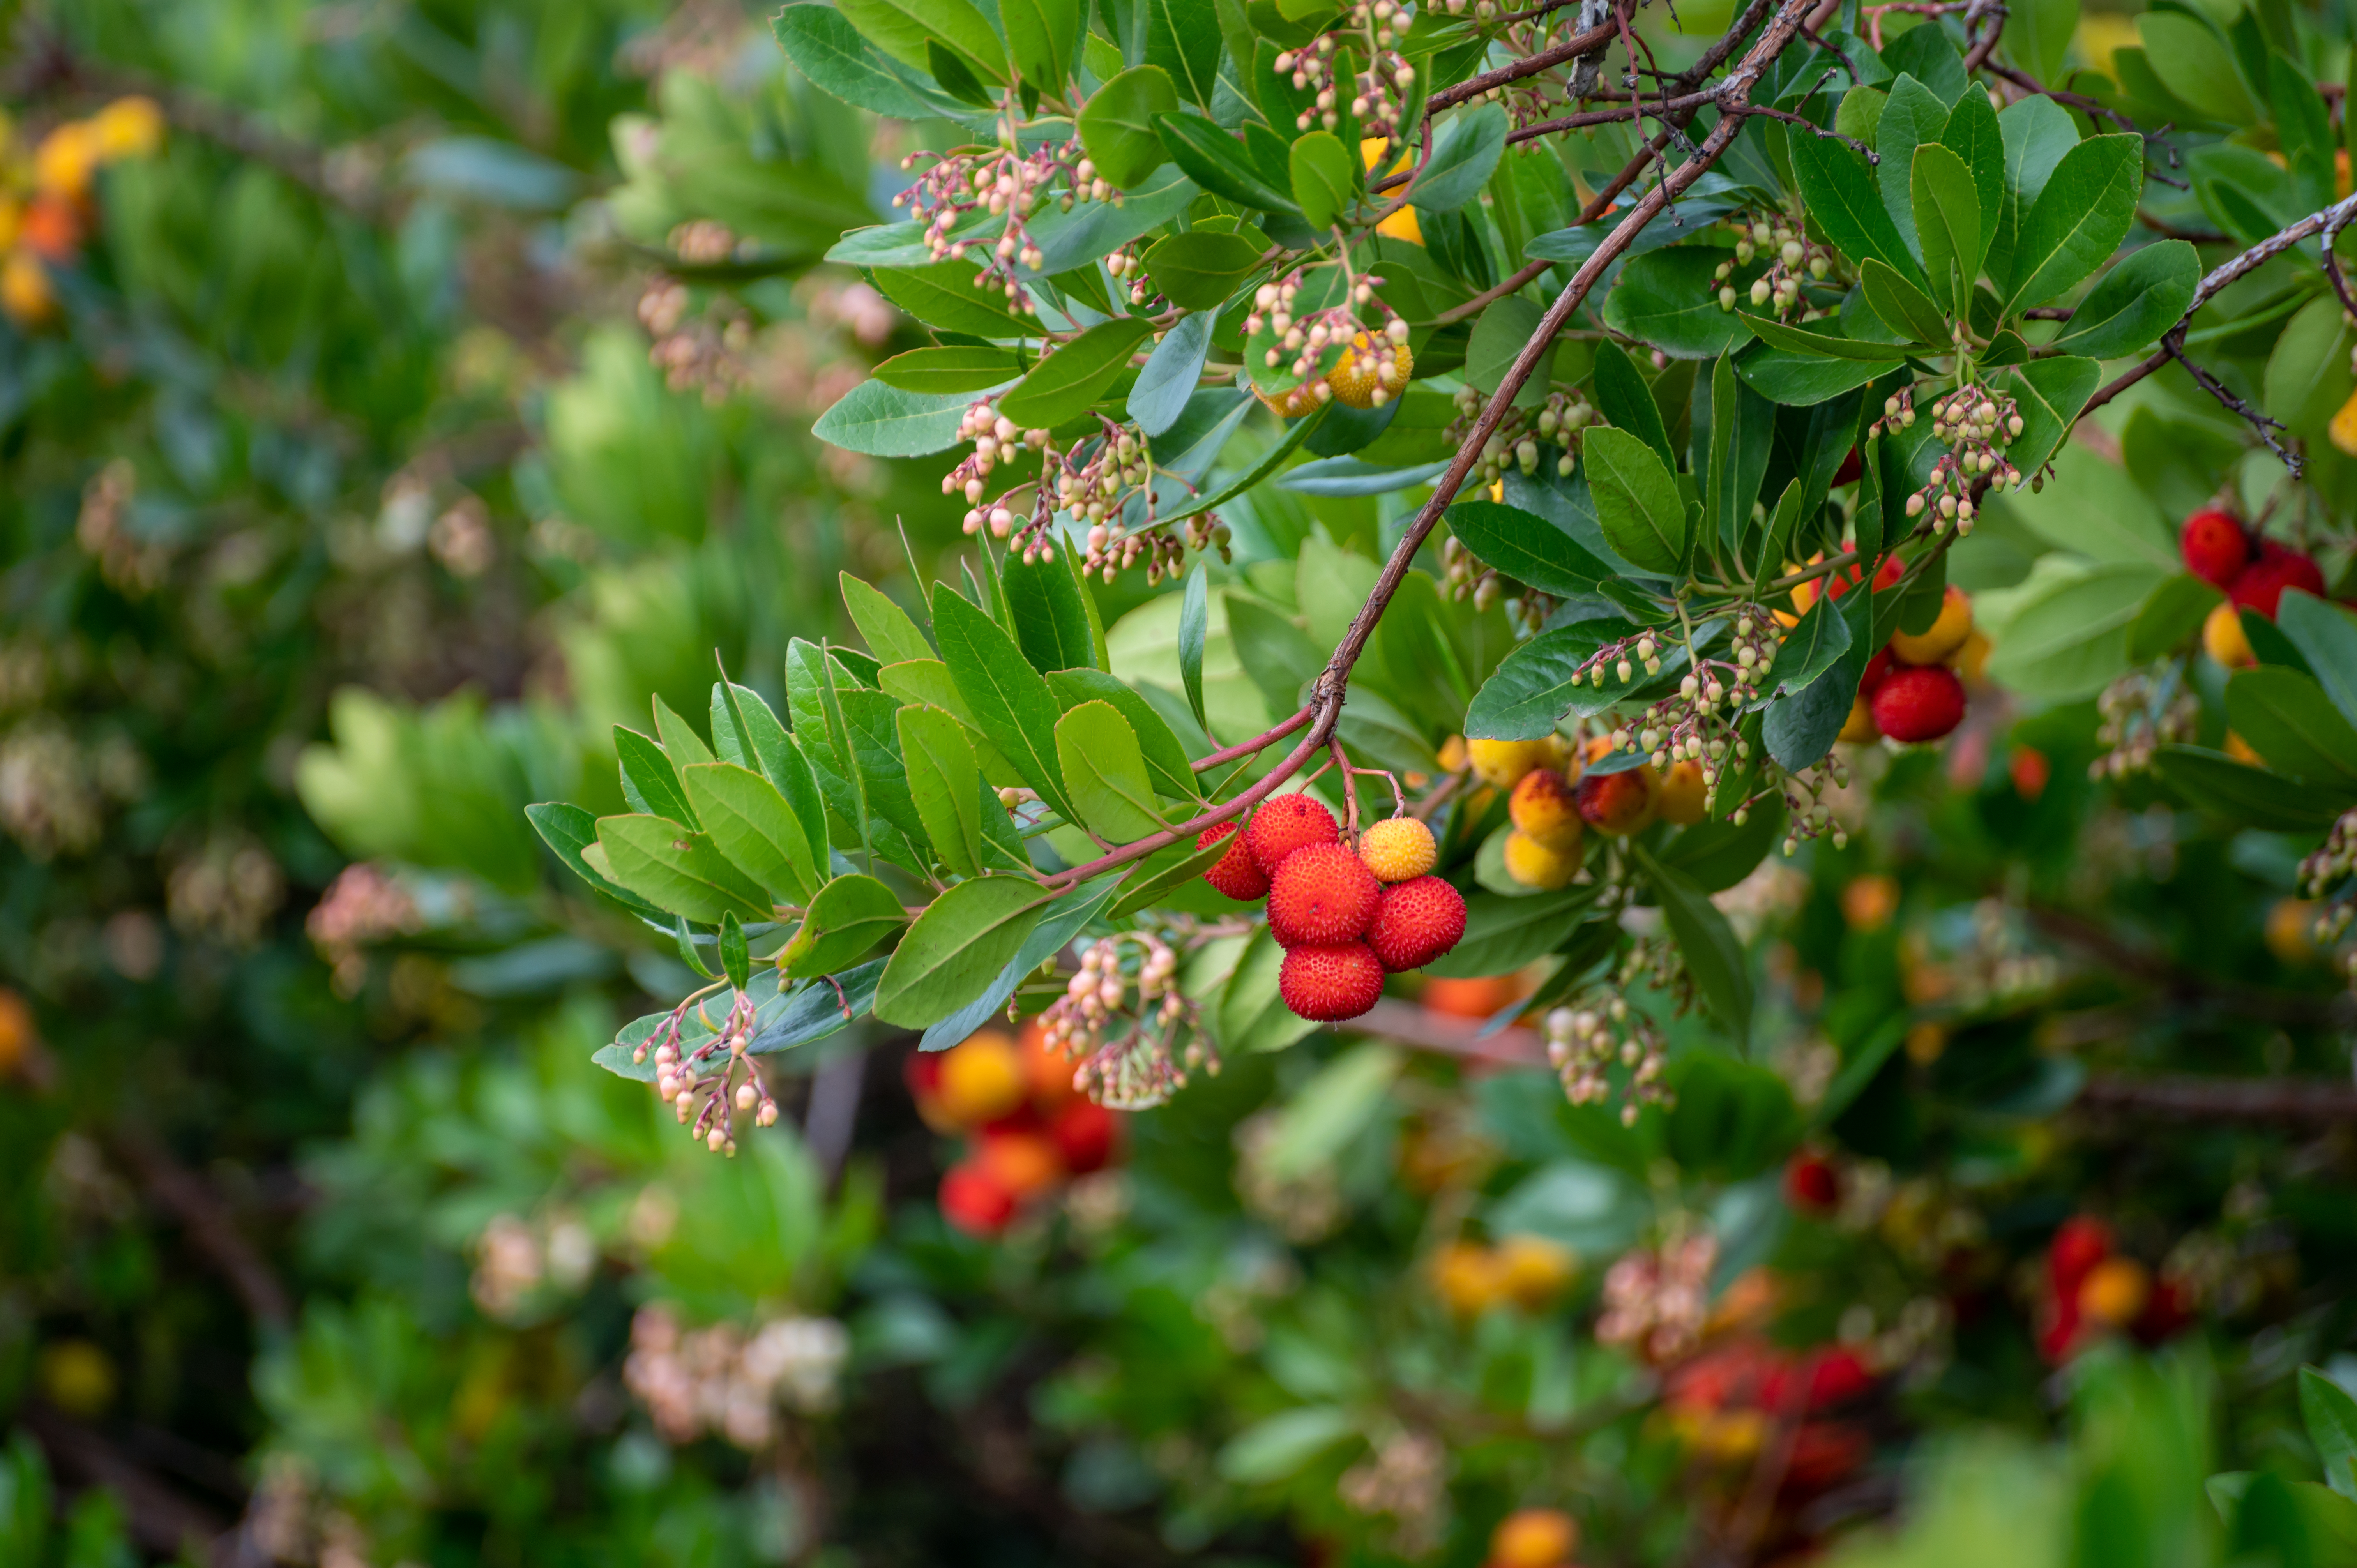 Attractive Evergreen Shrubs and Trees with Red Fruits and Berries